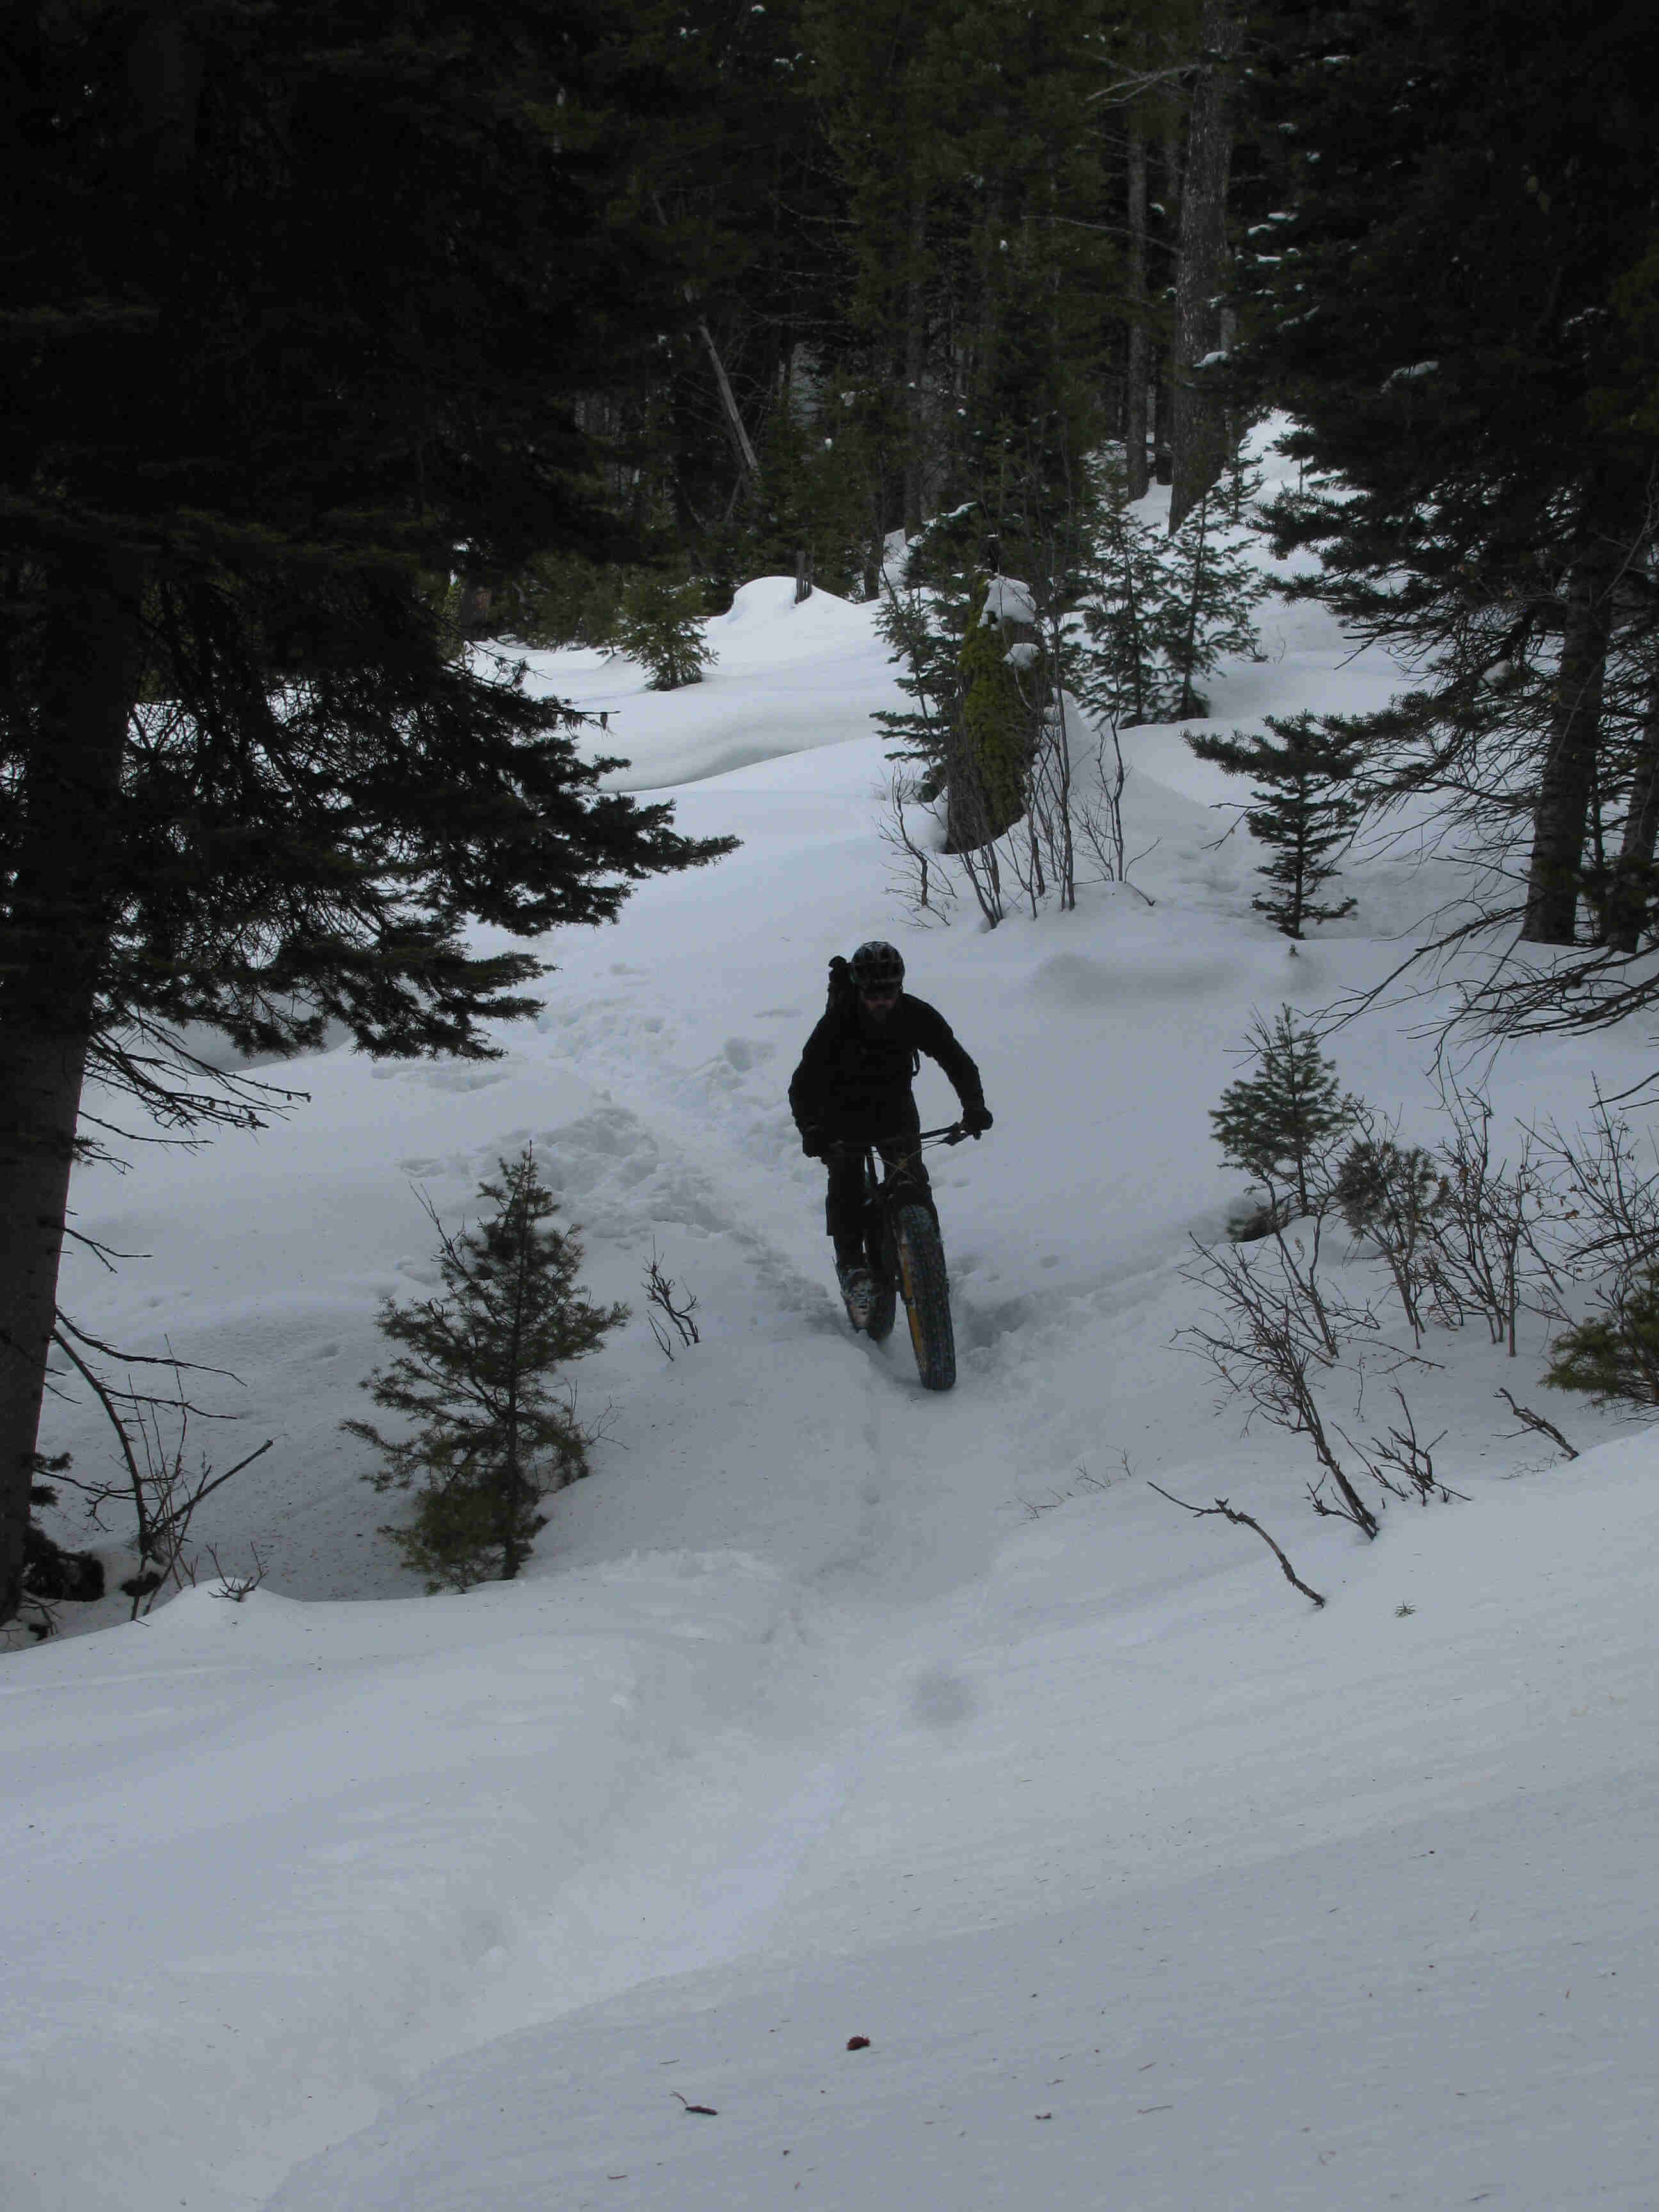 Front view of a cyclist, wearing winter outerwear, riding a Surly fat bike, on a snow covered trail in a forest